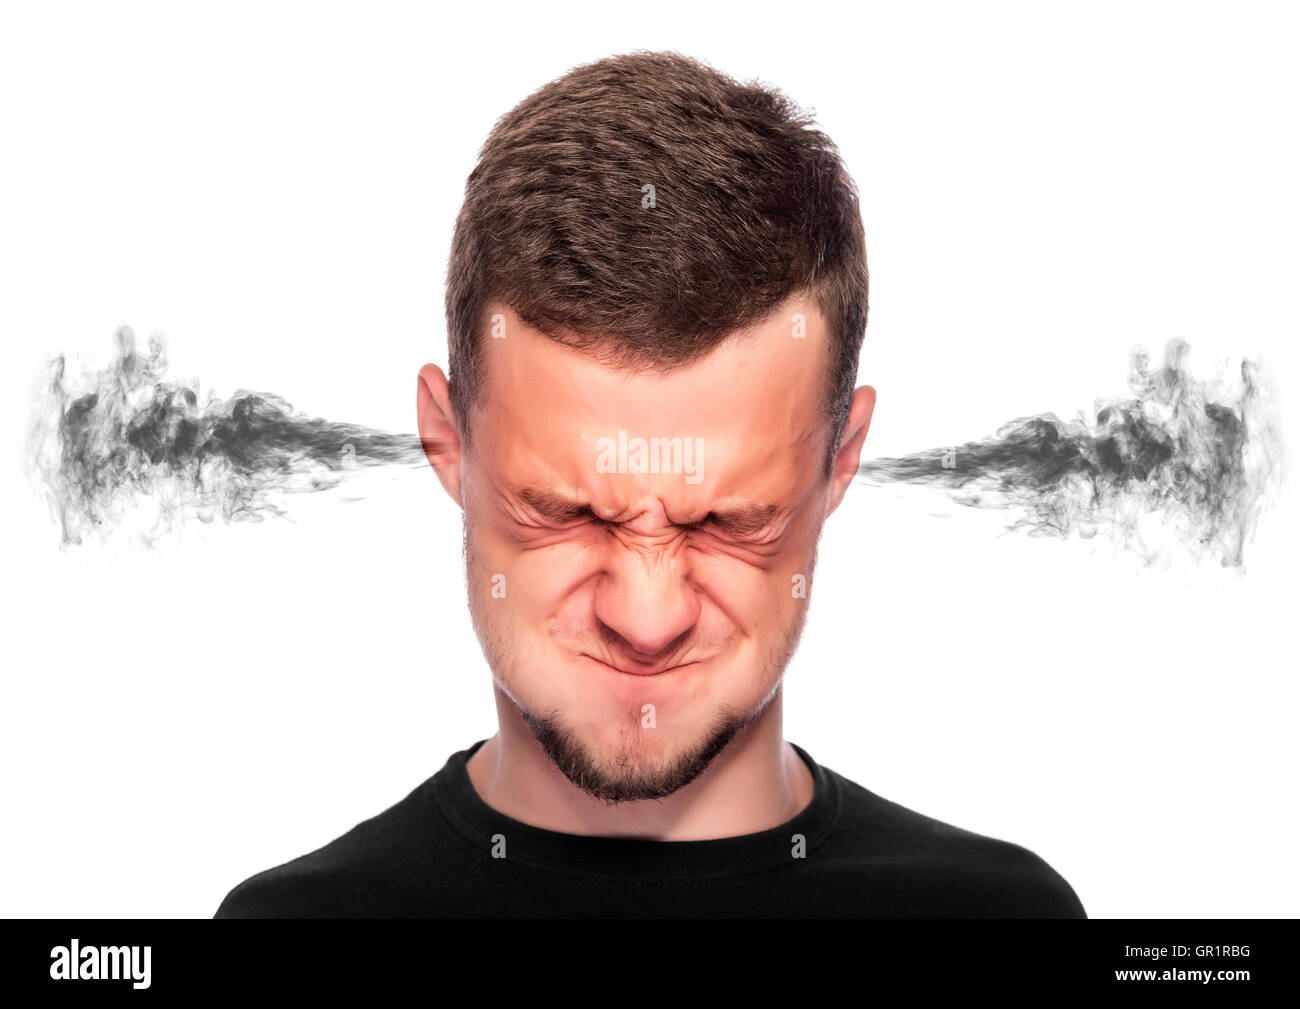 Angry man with smoke or fume coming out from his ears on white background. Stock Photo